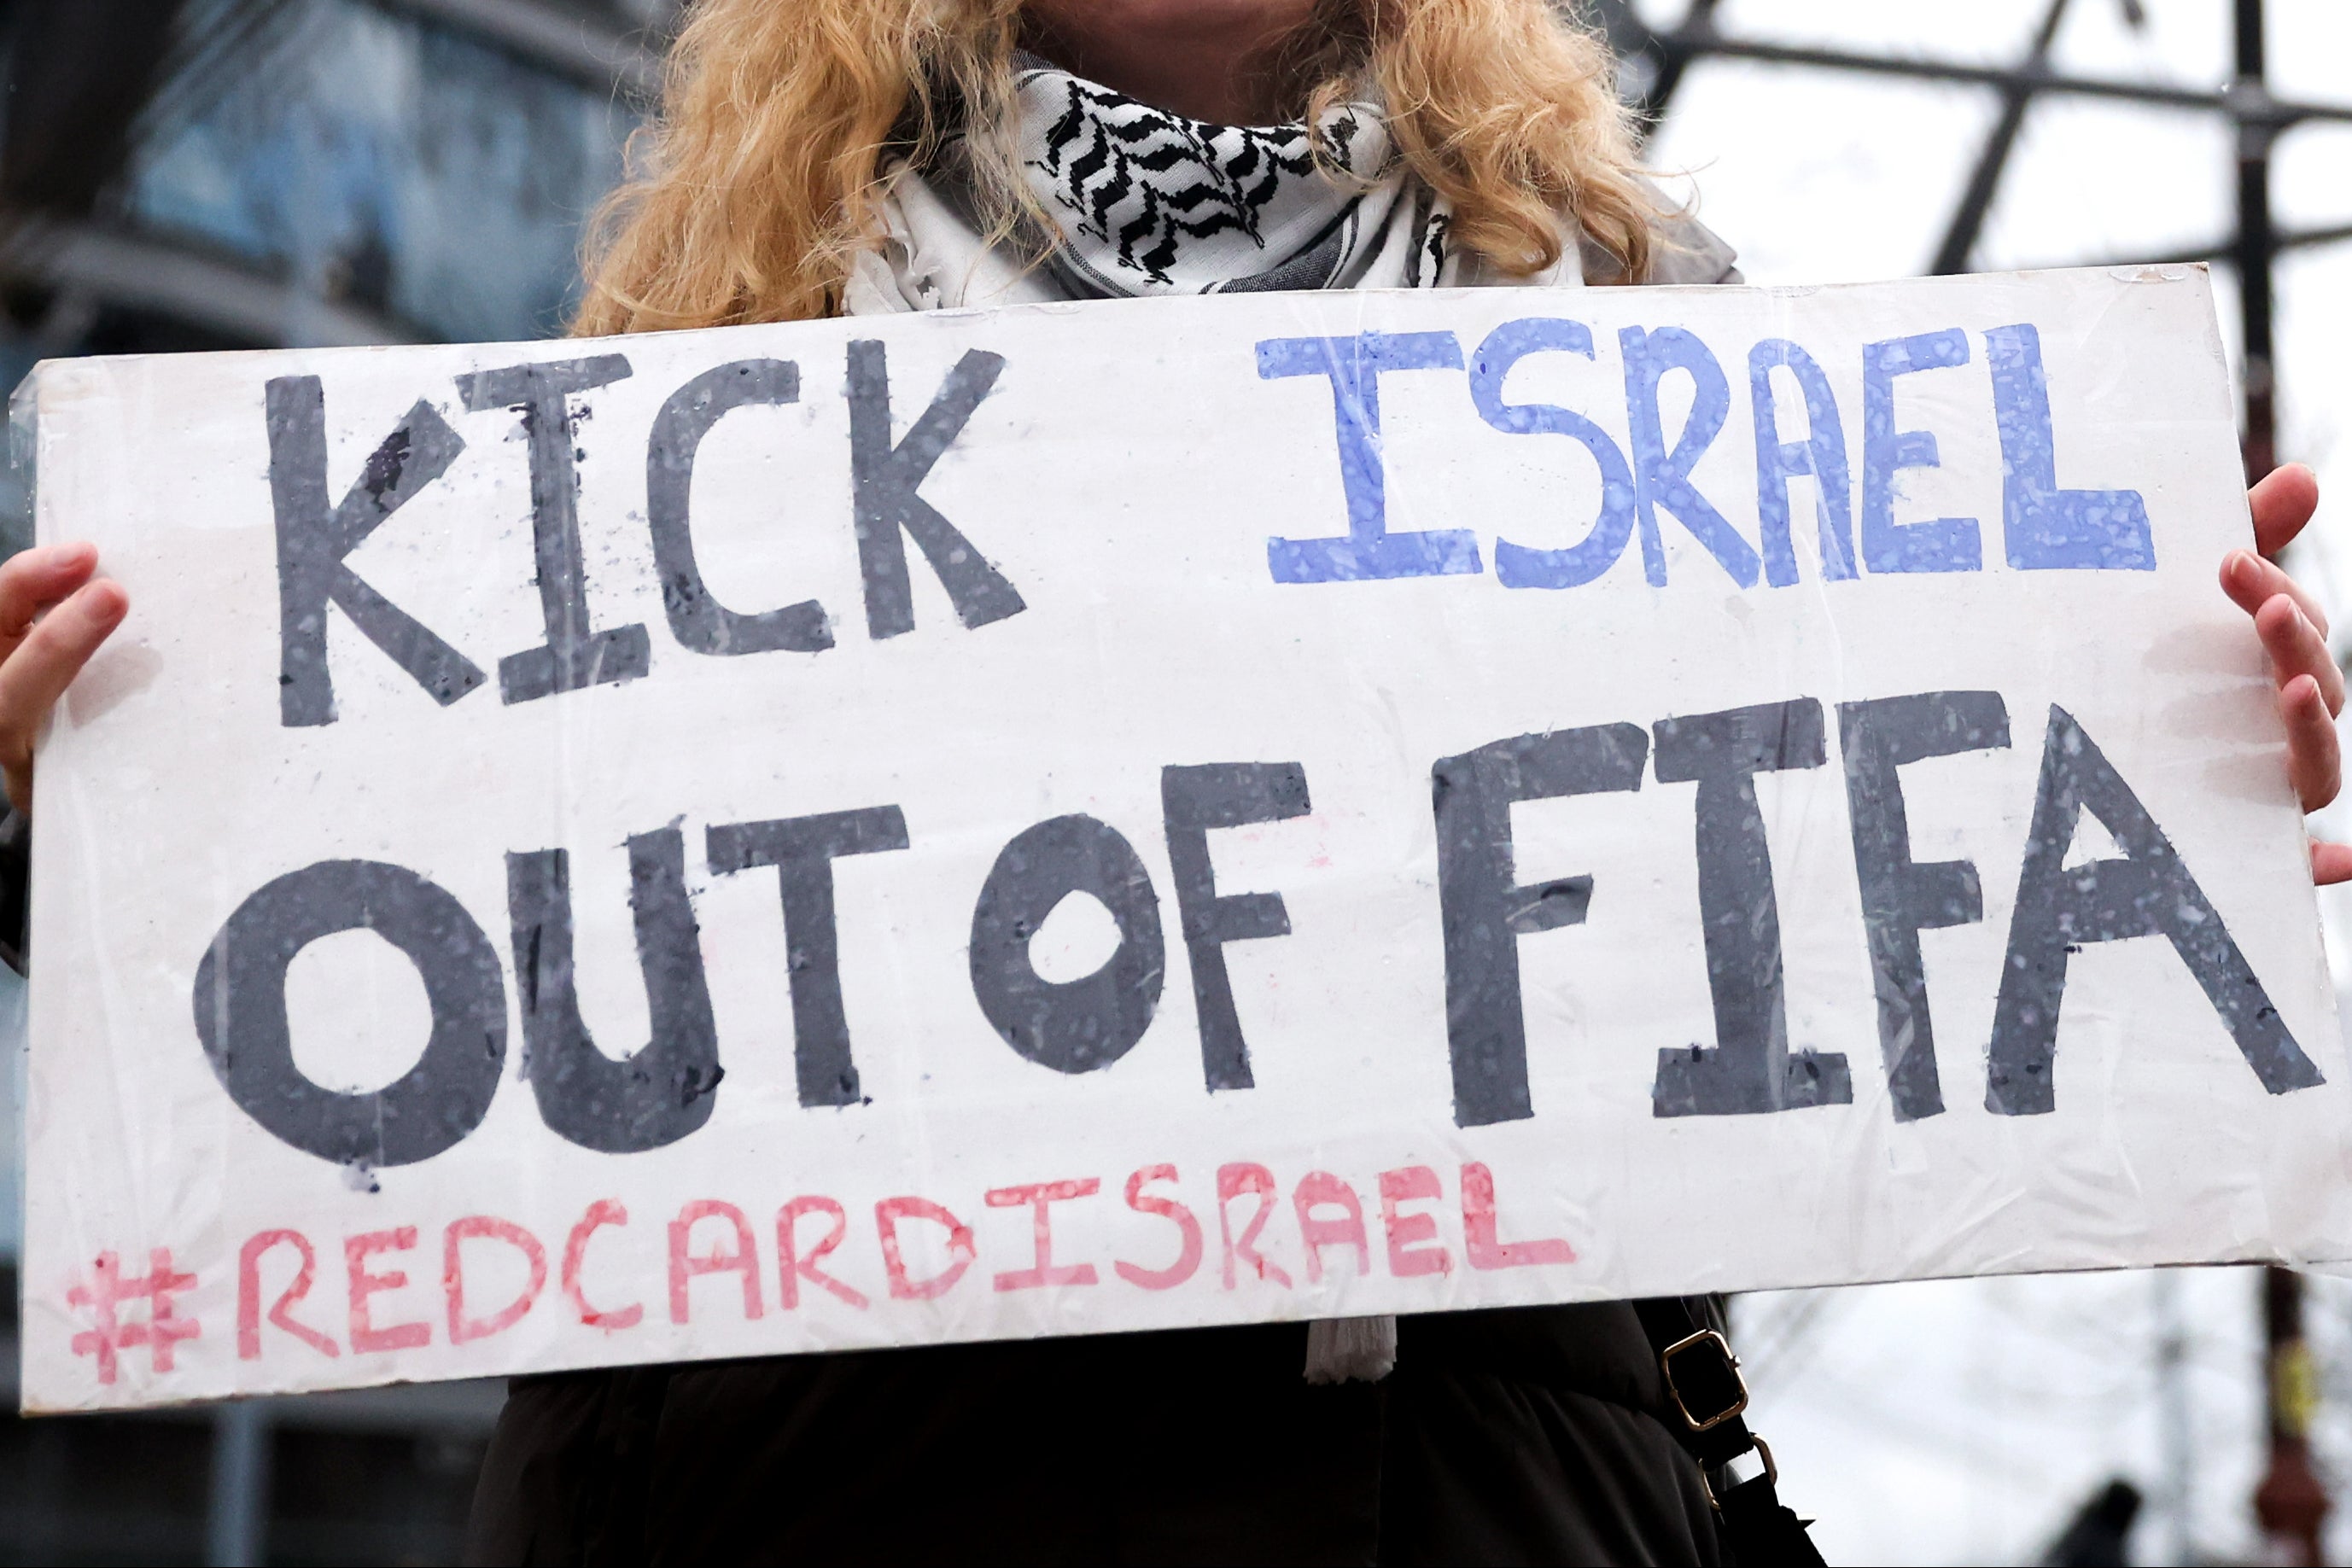 The calls for Israel to be kicked out of Fifa are growing